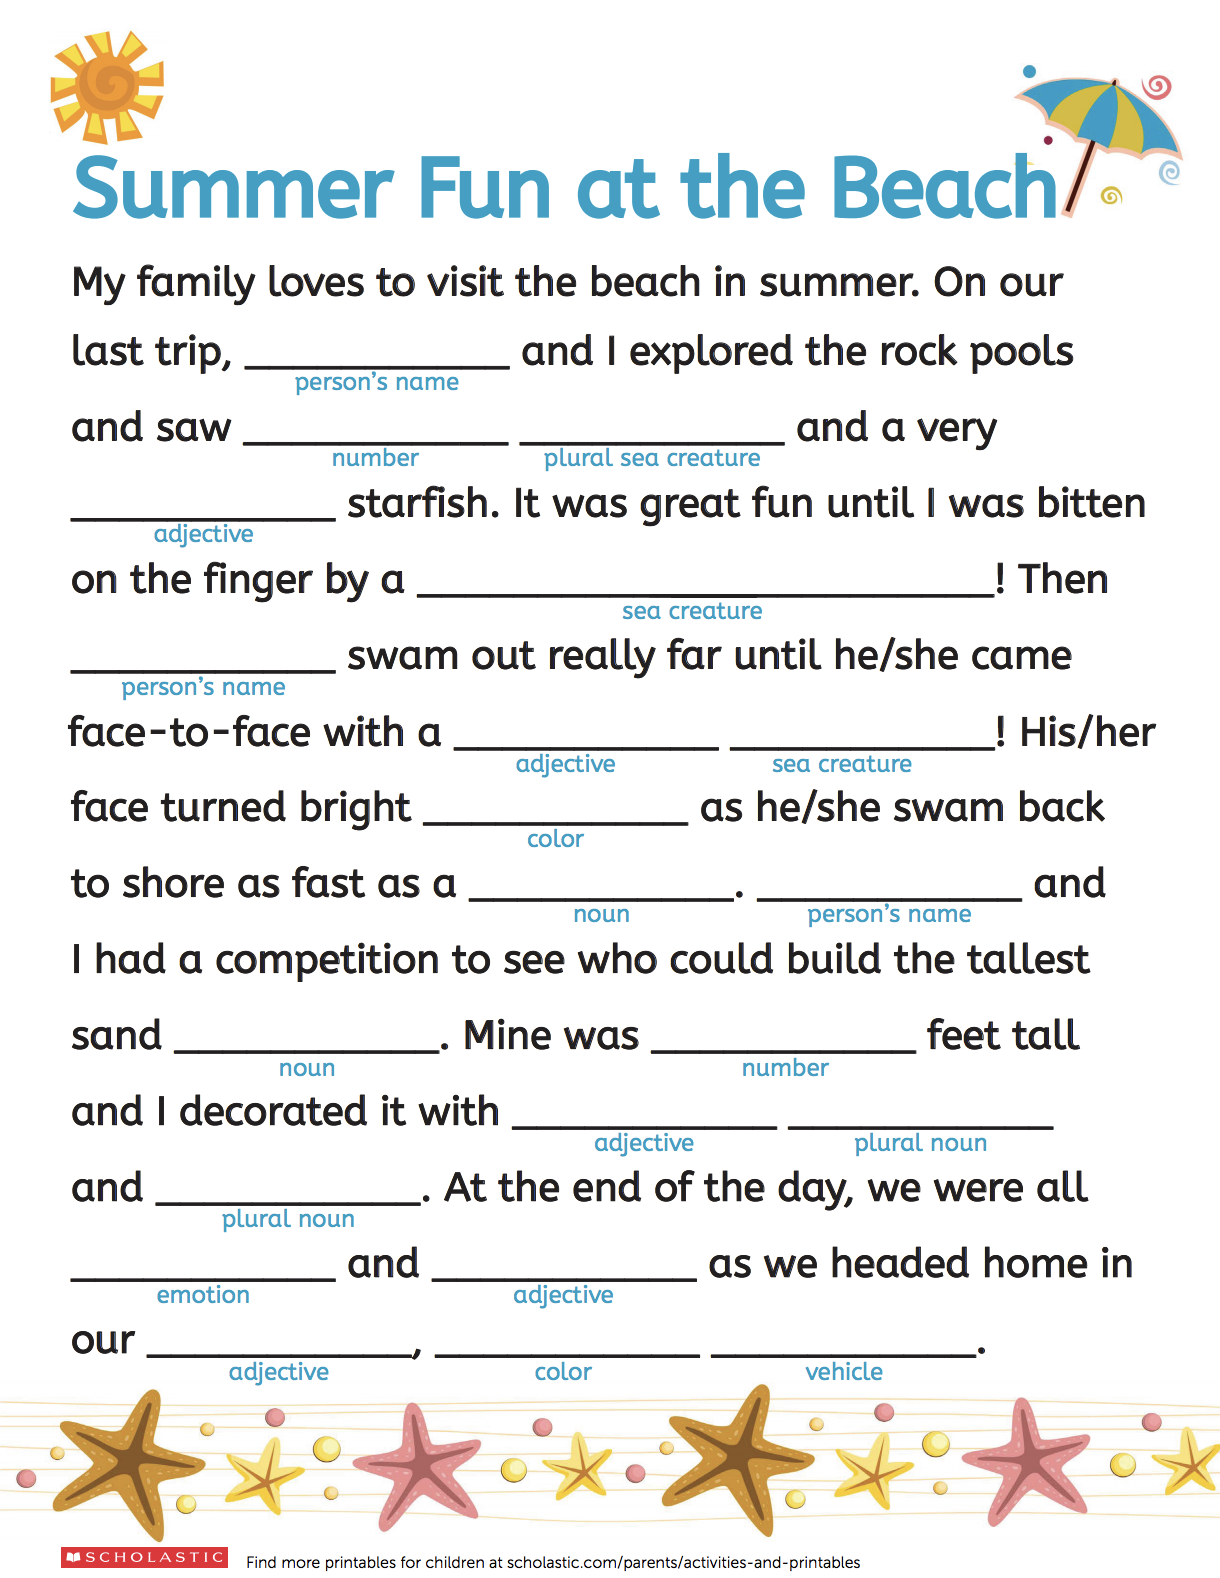 Get Your Kids Ready For A Summer To Remember With This Fun Mad Libs 